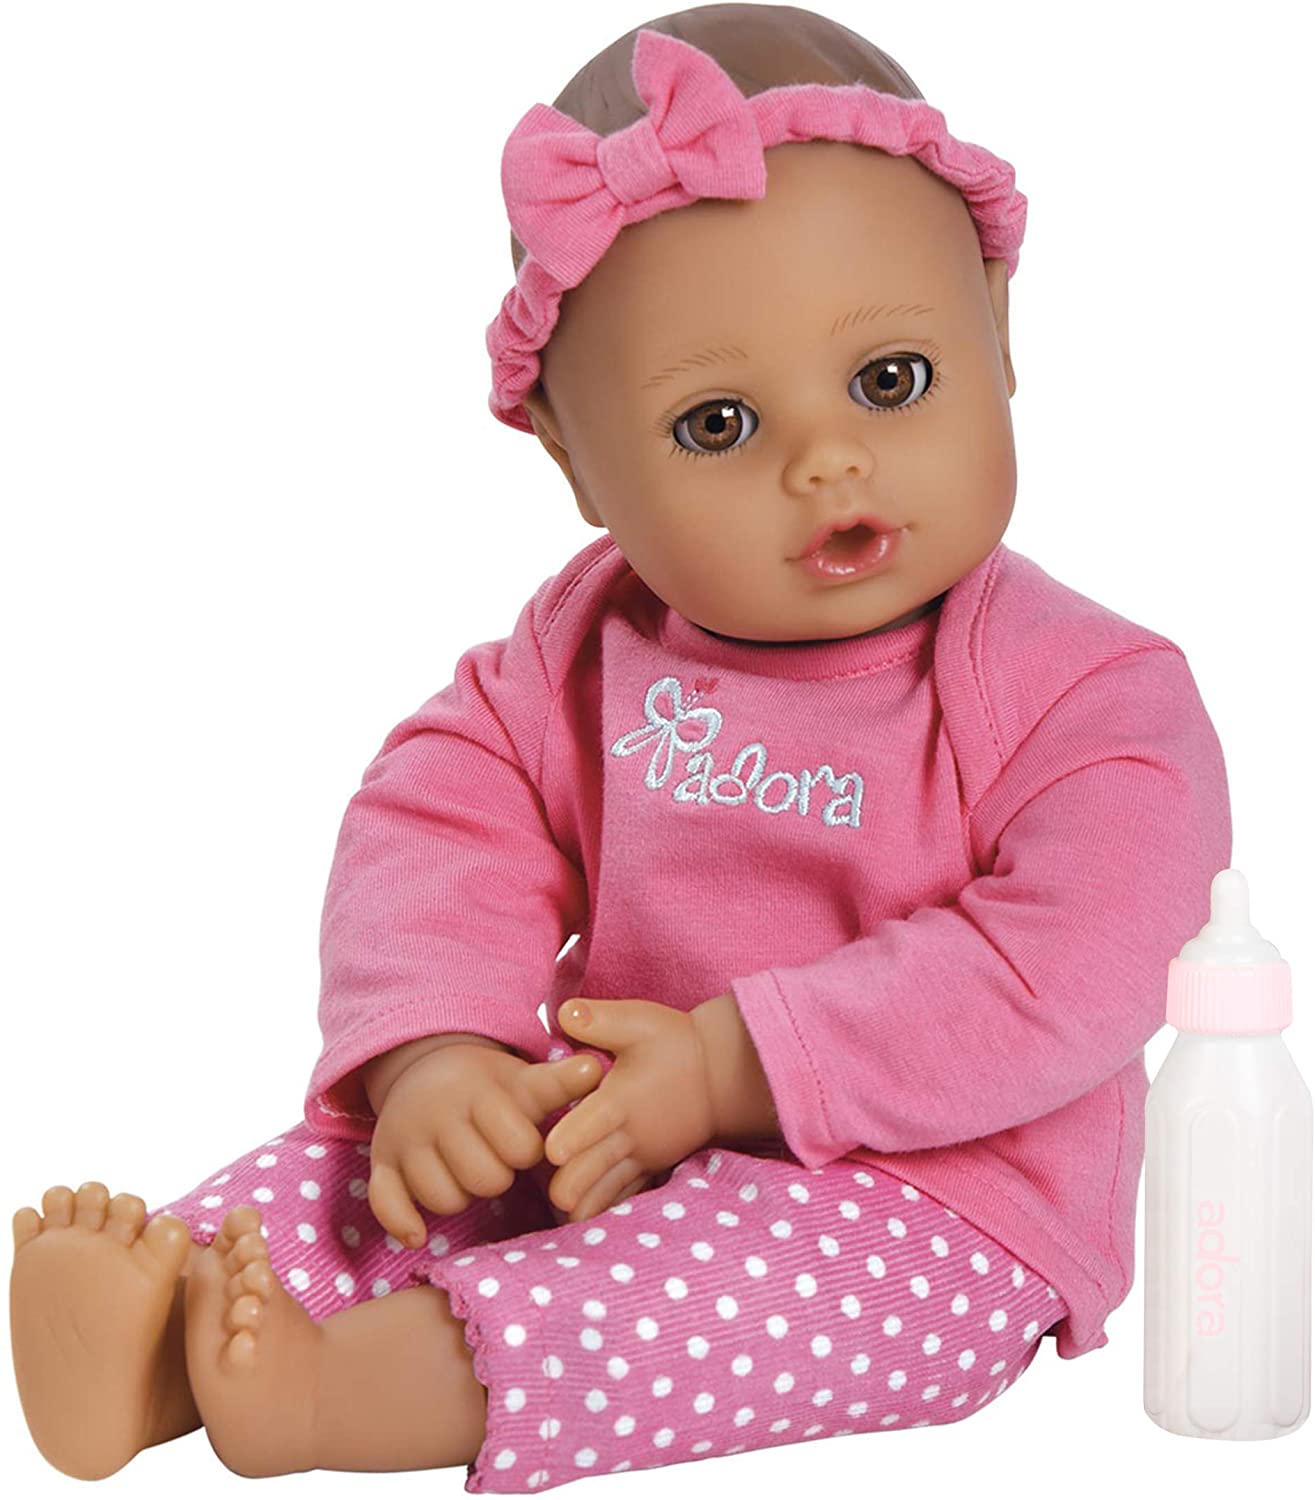 Adora Playtime Collection Pink Baby Doll & Bottle, 13-Inch